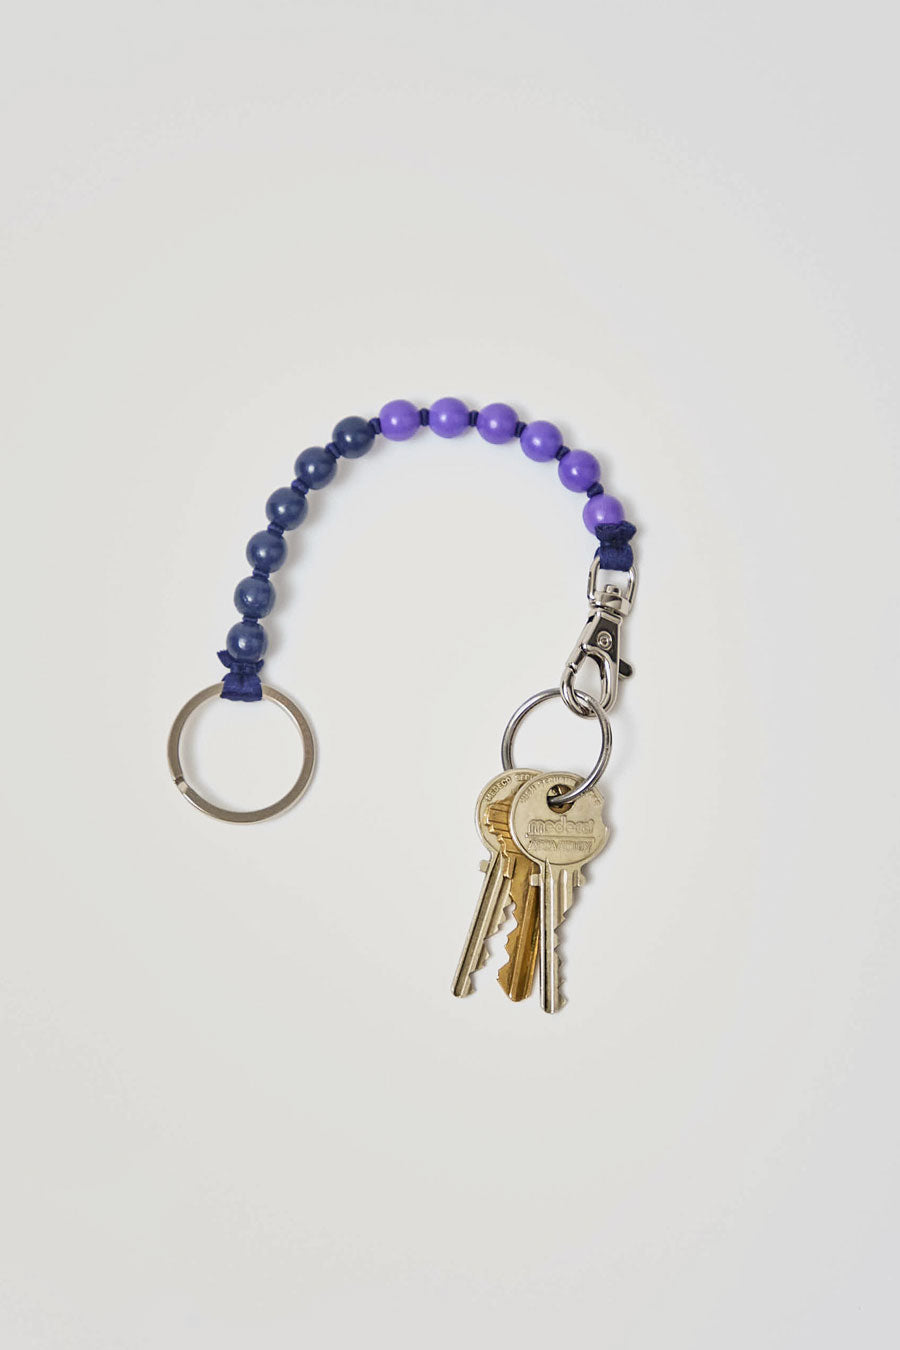 Ina Seifart Perlen Short Keyholder in Blueberry and Purple Mix